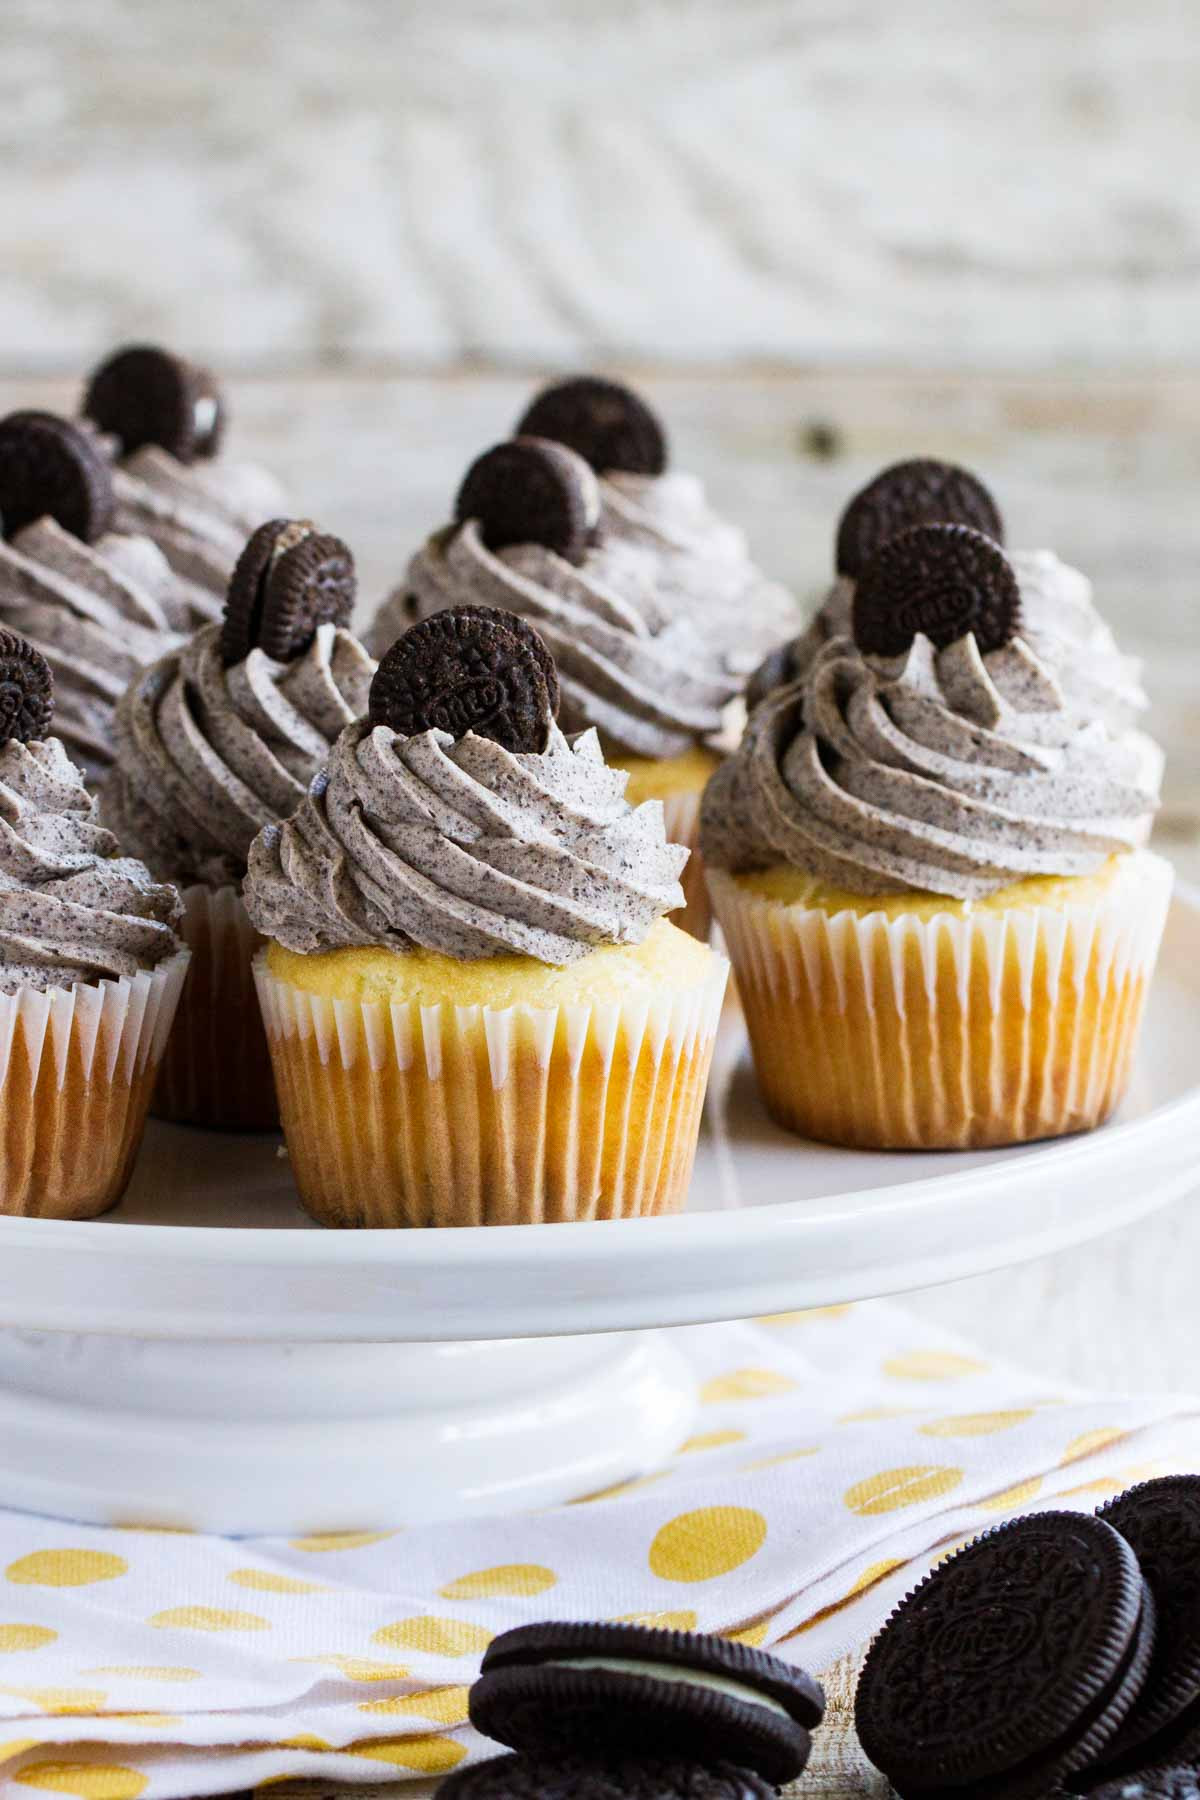 Cookie And The Cupcakes
 Cookies and Cream Cupcakes Best Oreo Cupcakes Taste